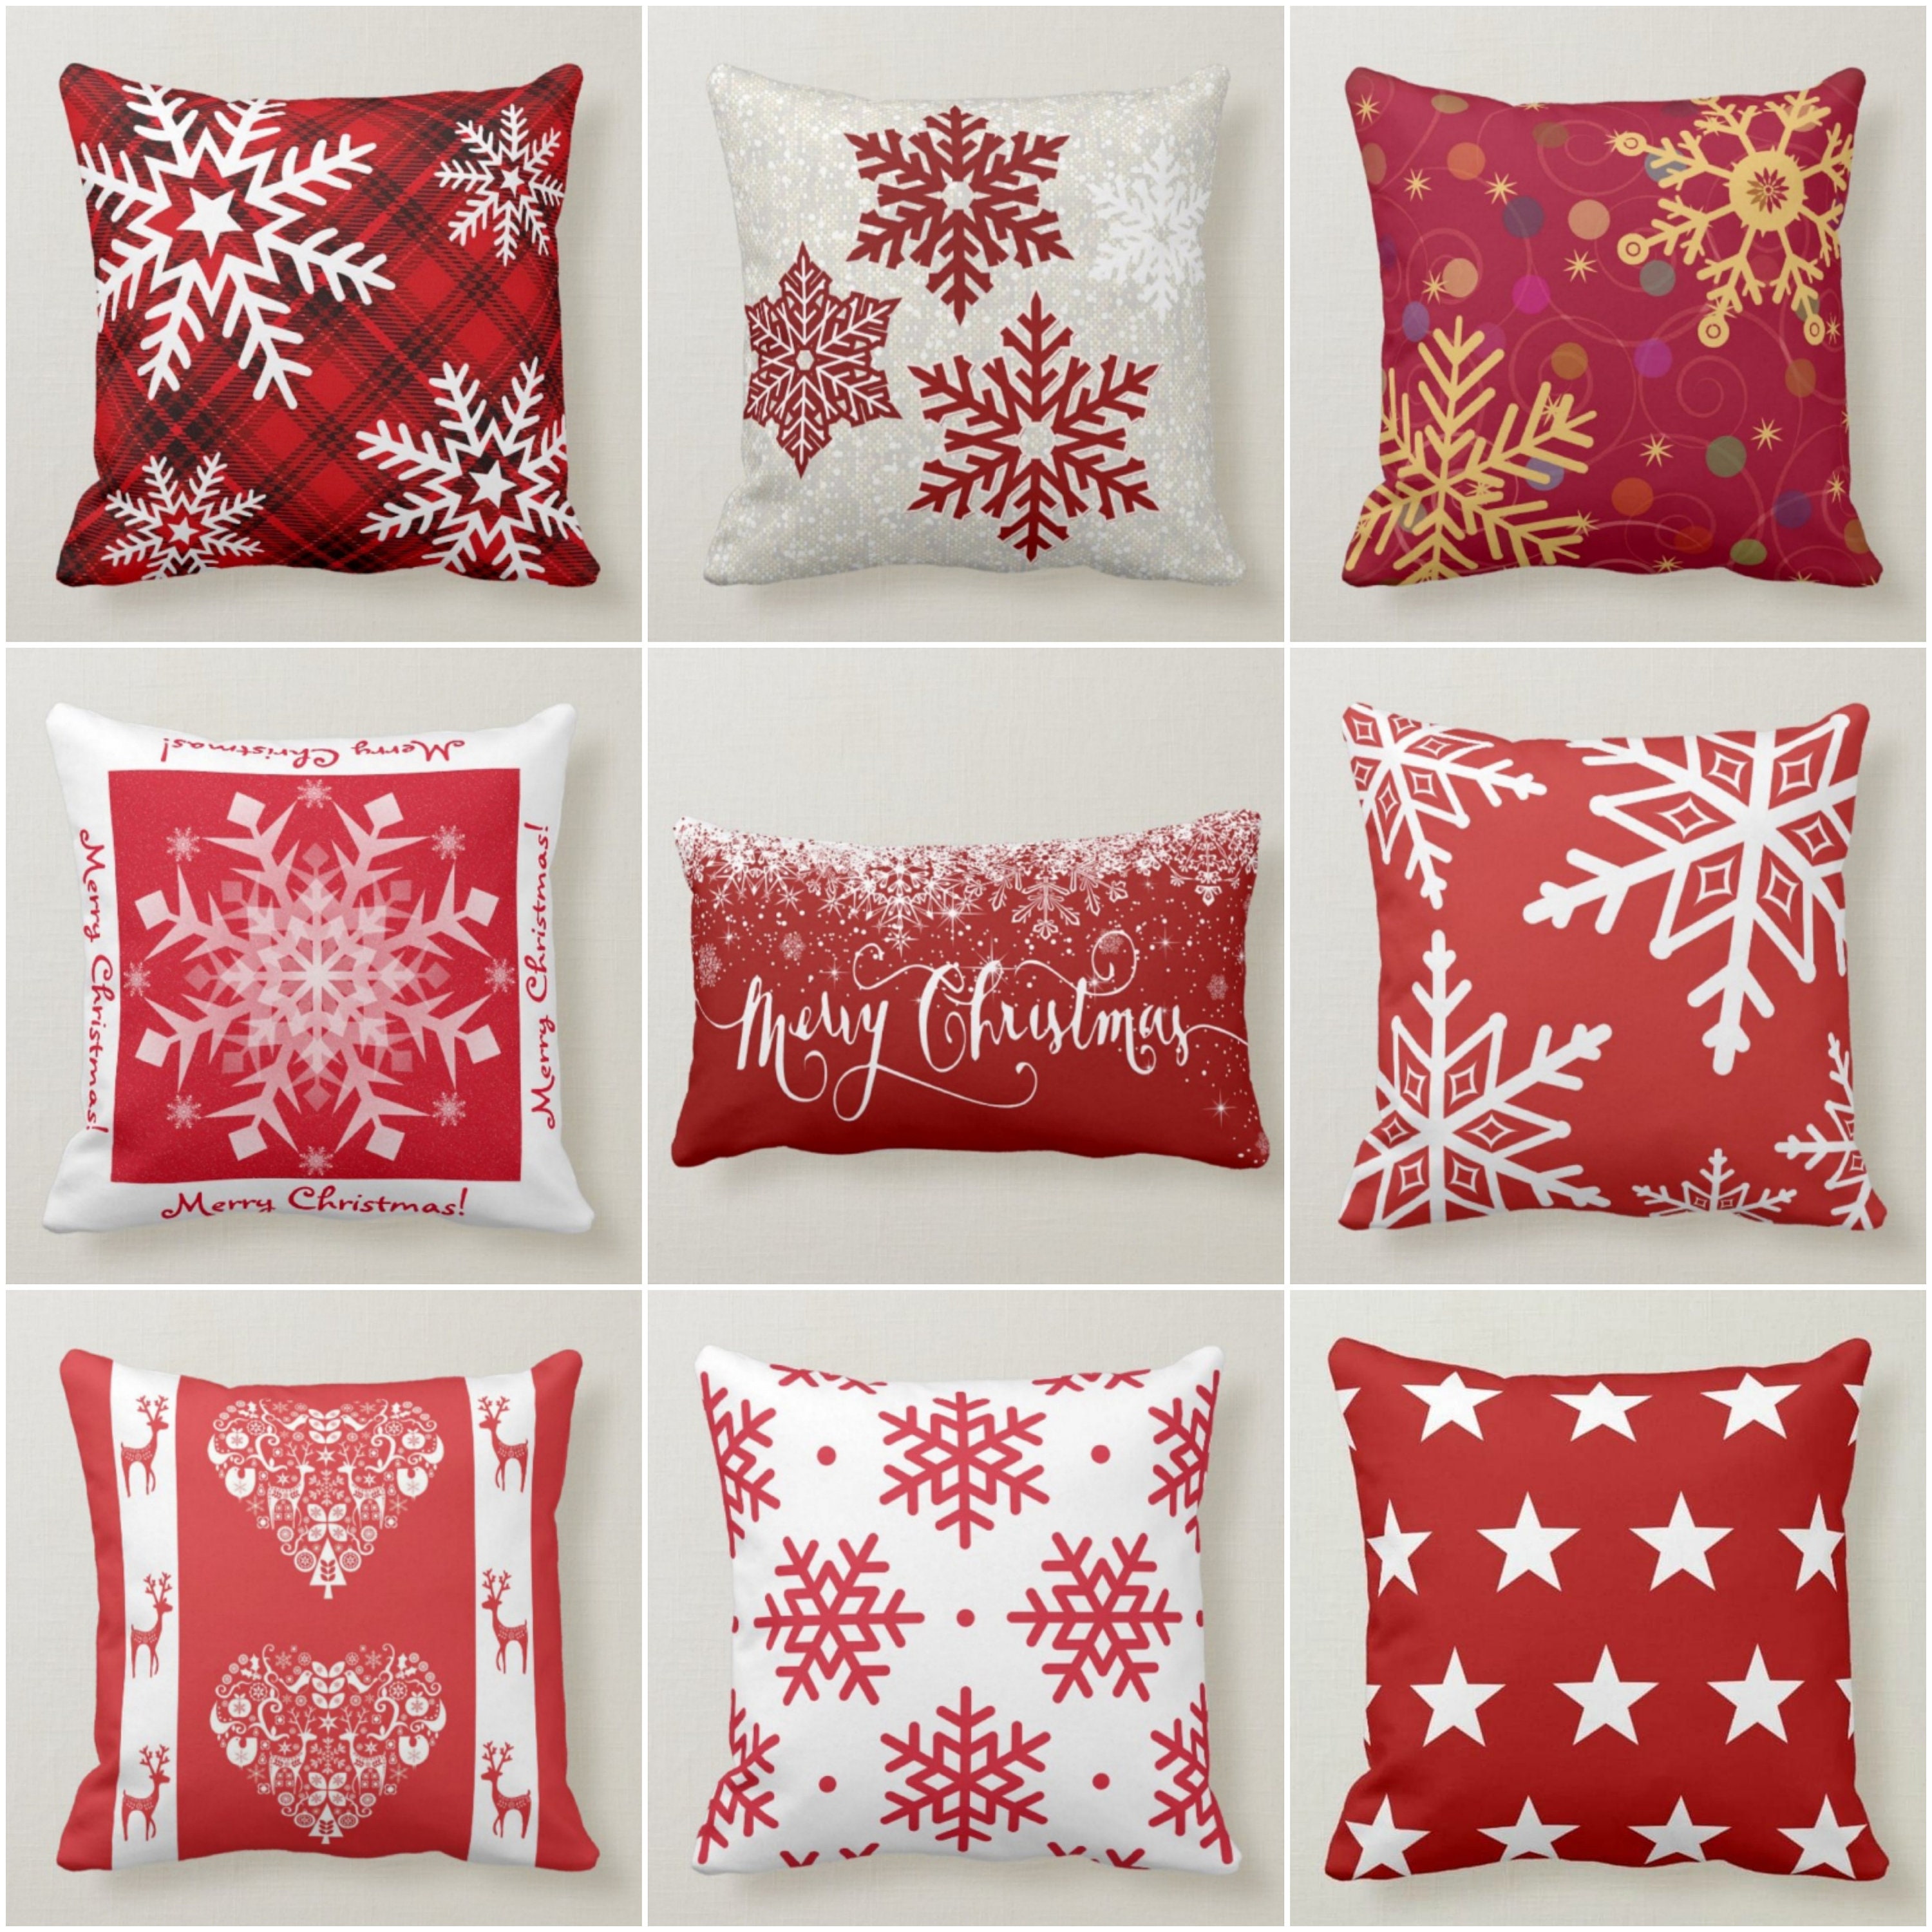 Outdoor Throw Pillow Waterproof Pillows,Winter Snowman Christmas Tree  Snowflake Red Back Decorative Pillow Covers with Insert,Patio Pillows  Pillowcase